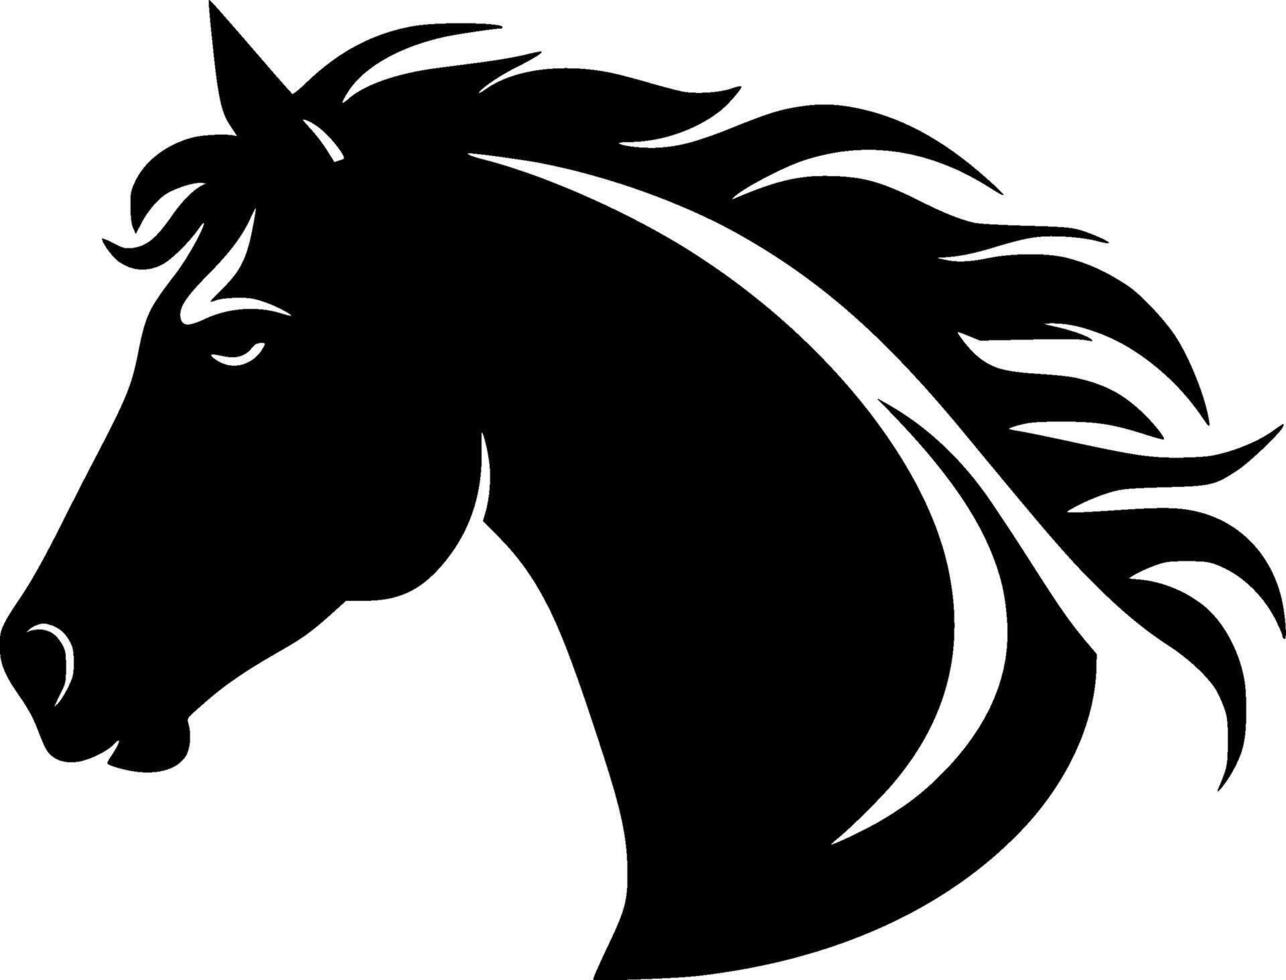 Horse - Black and White Isolated Icon - Vector illustration